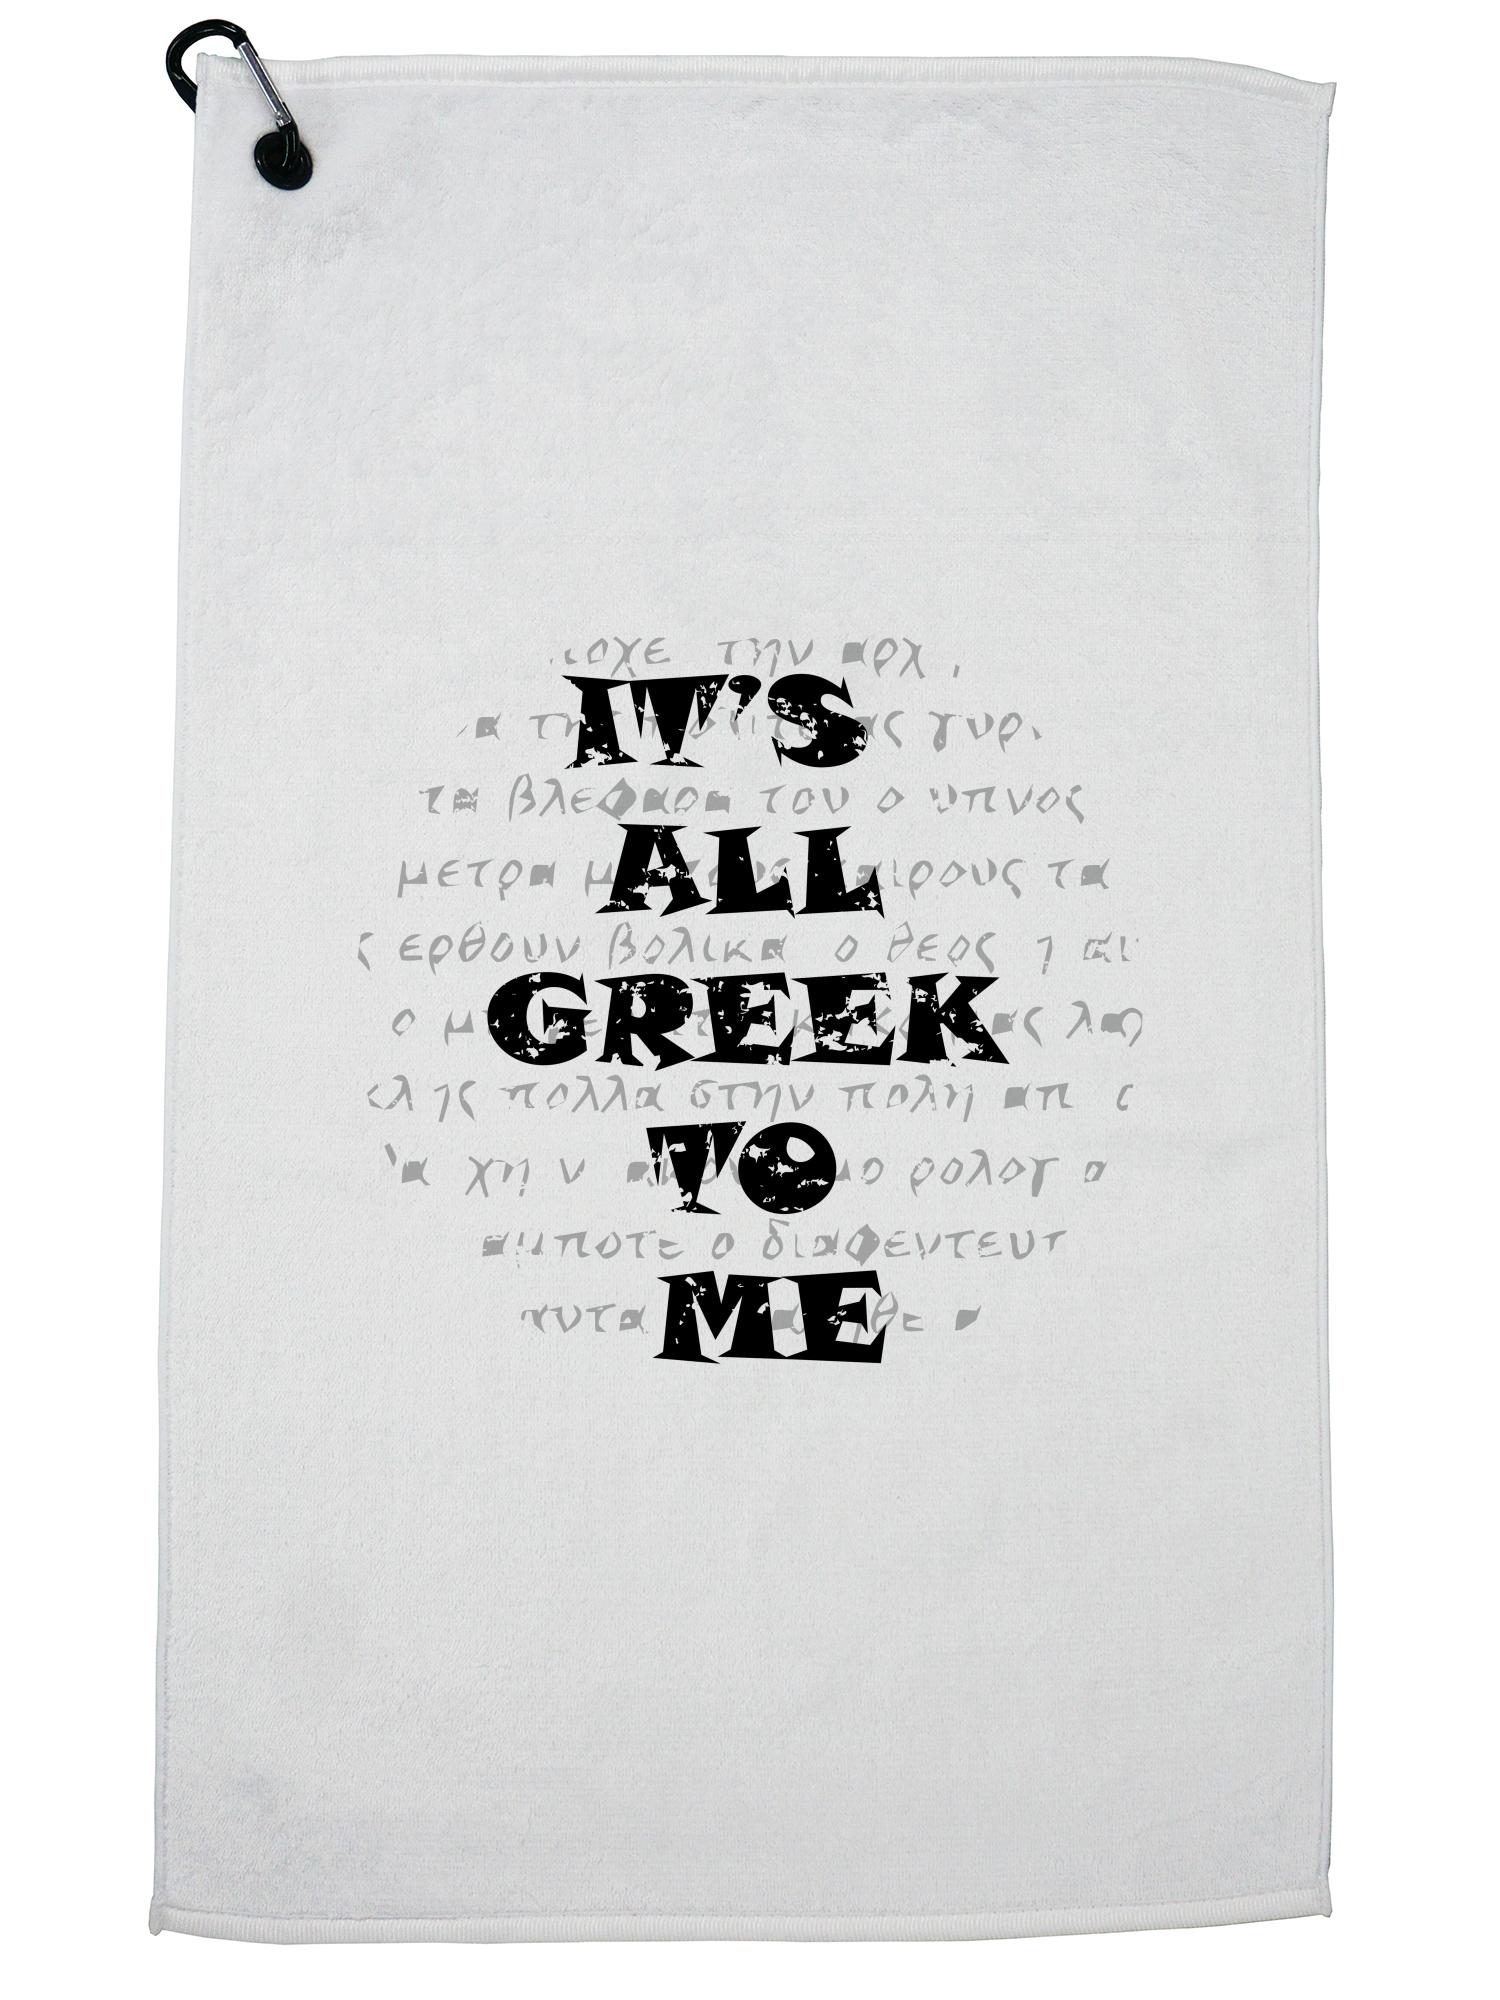 It's All Greek To Me - Classic Saying of Understanding Golf Towel with Carabiner Clip - image 1 of 5